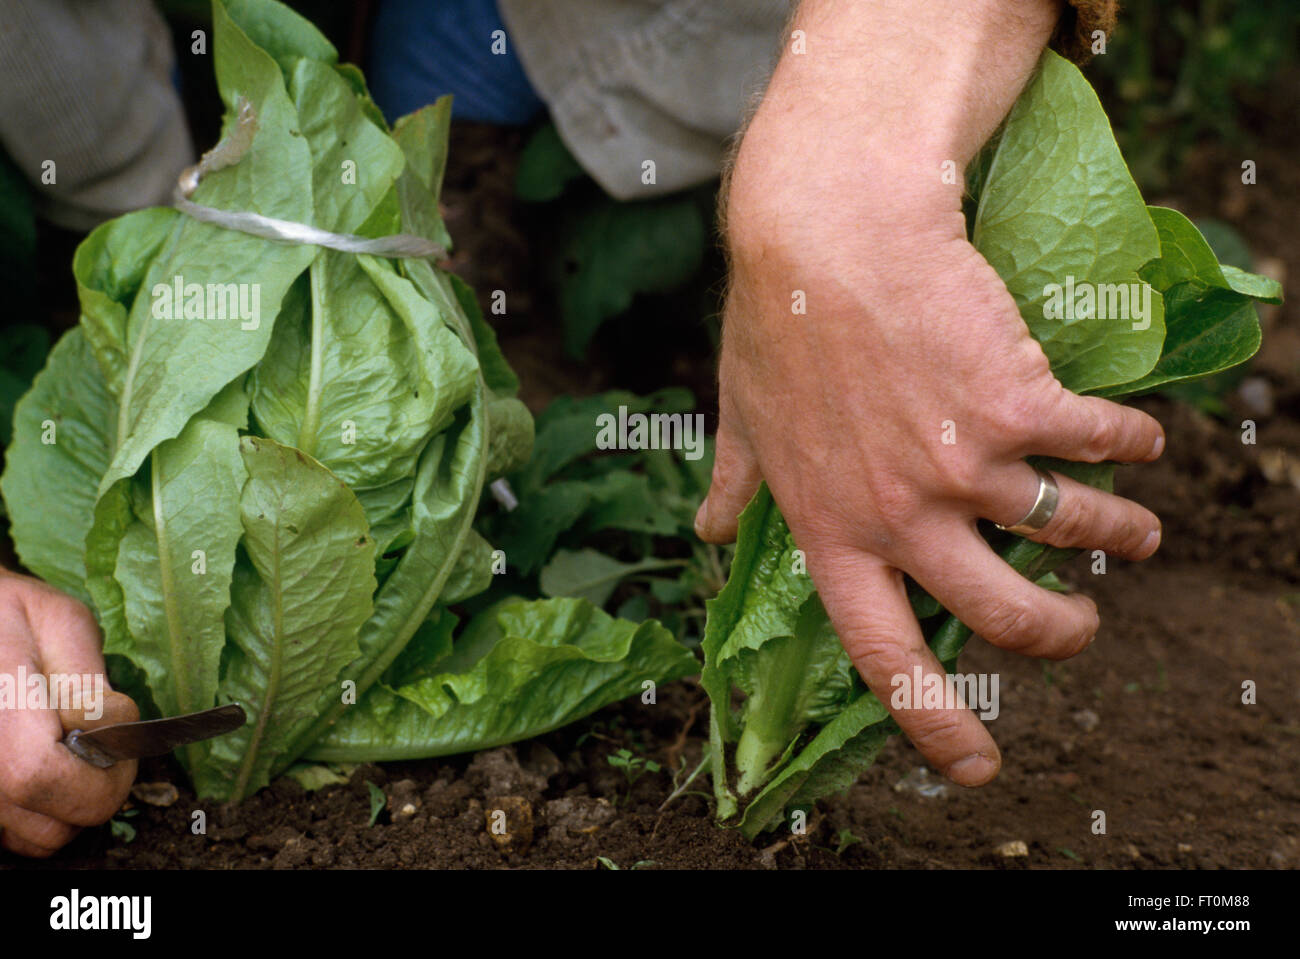 Close-up of hands picking cos lettuce Stock Photo